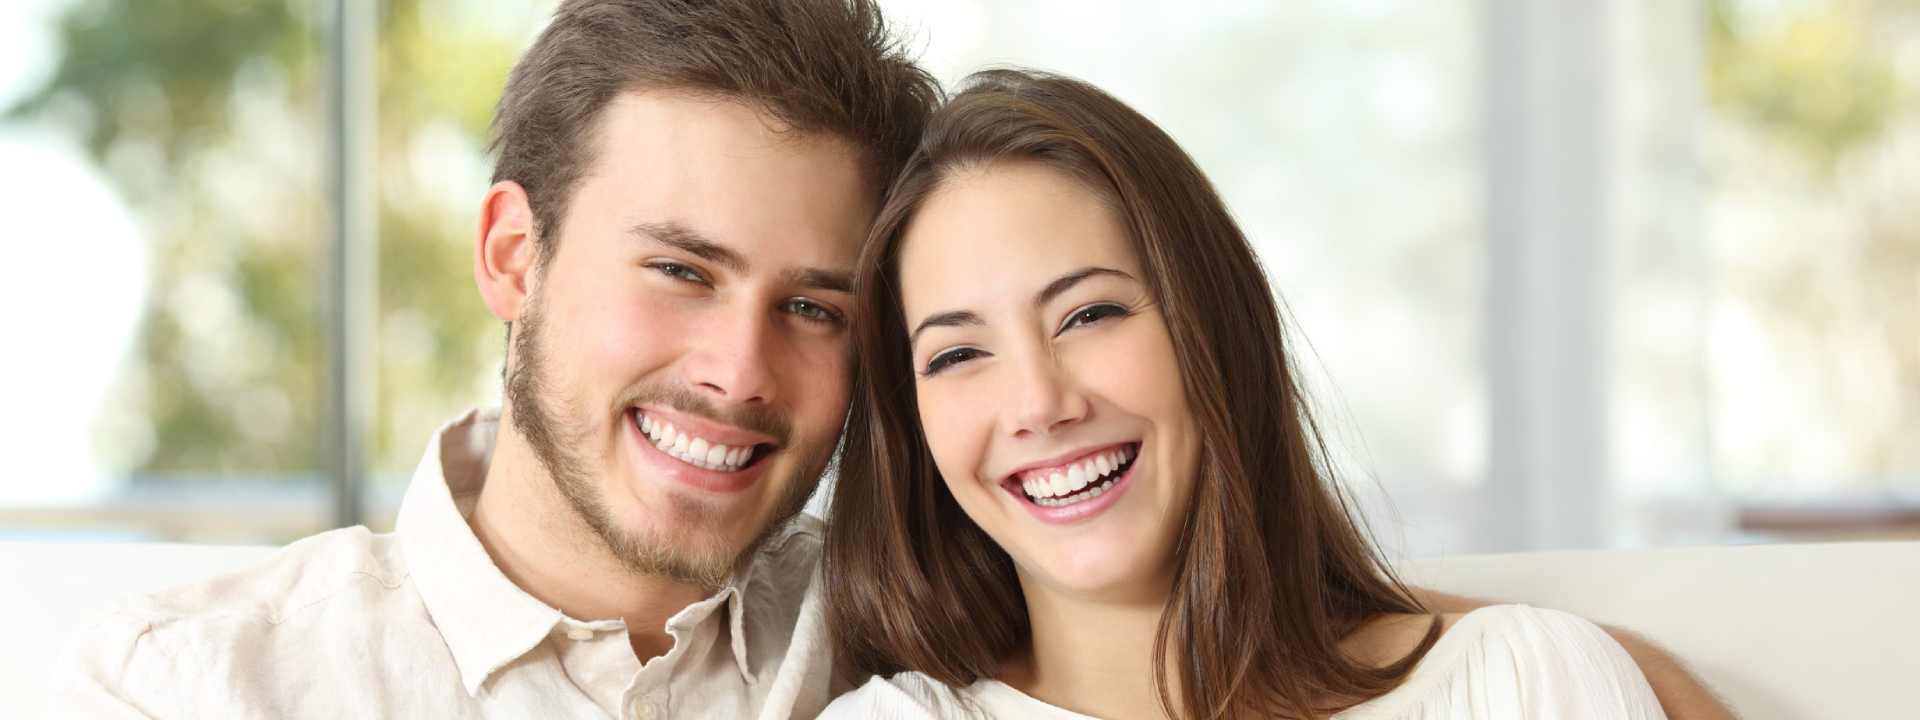 Happiness and Dental Confidence: Couple's Bright Smiles Achieved through Expert Dentistry